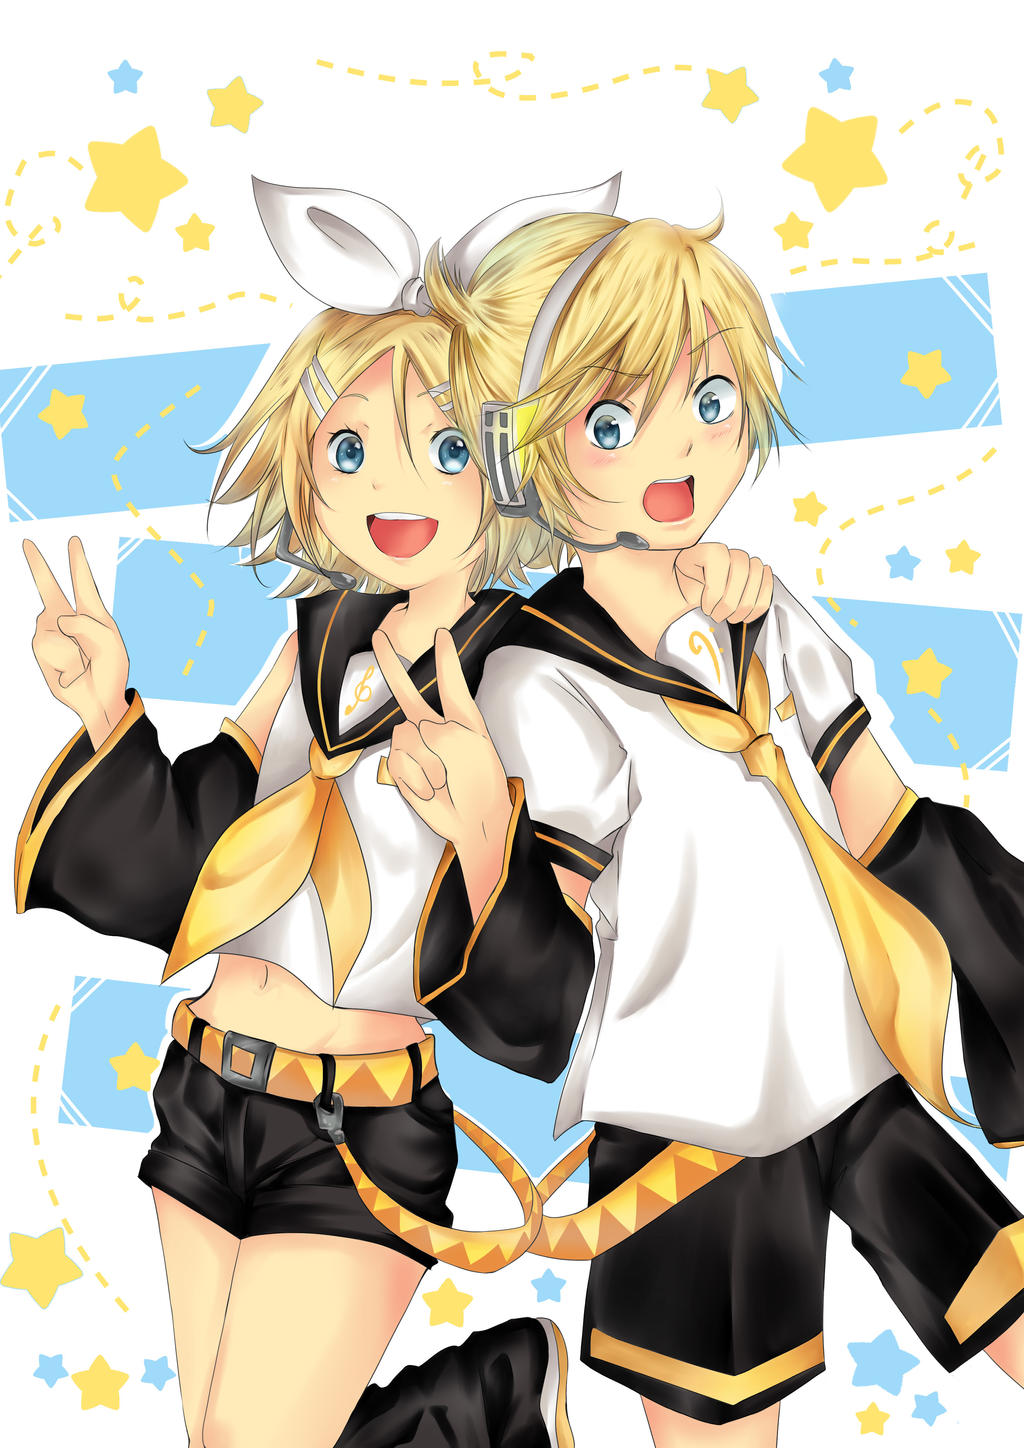 Cute Twins  by makii chi on DeviantArt